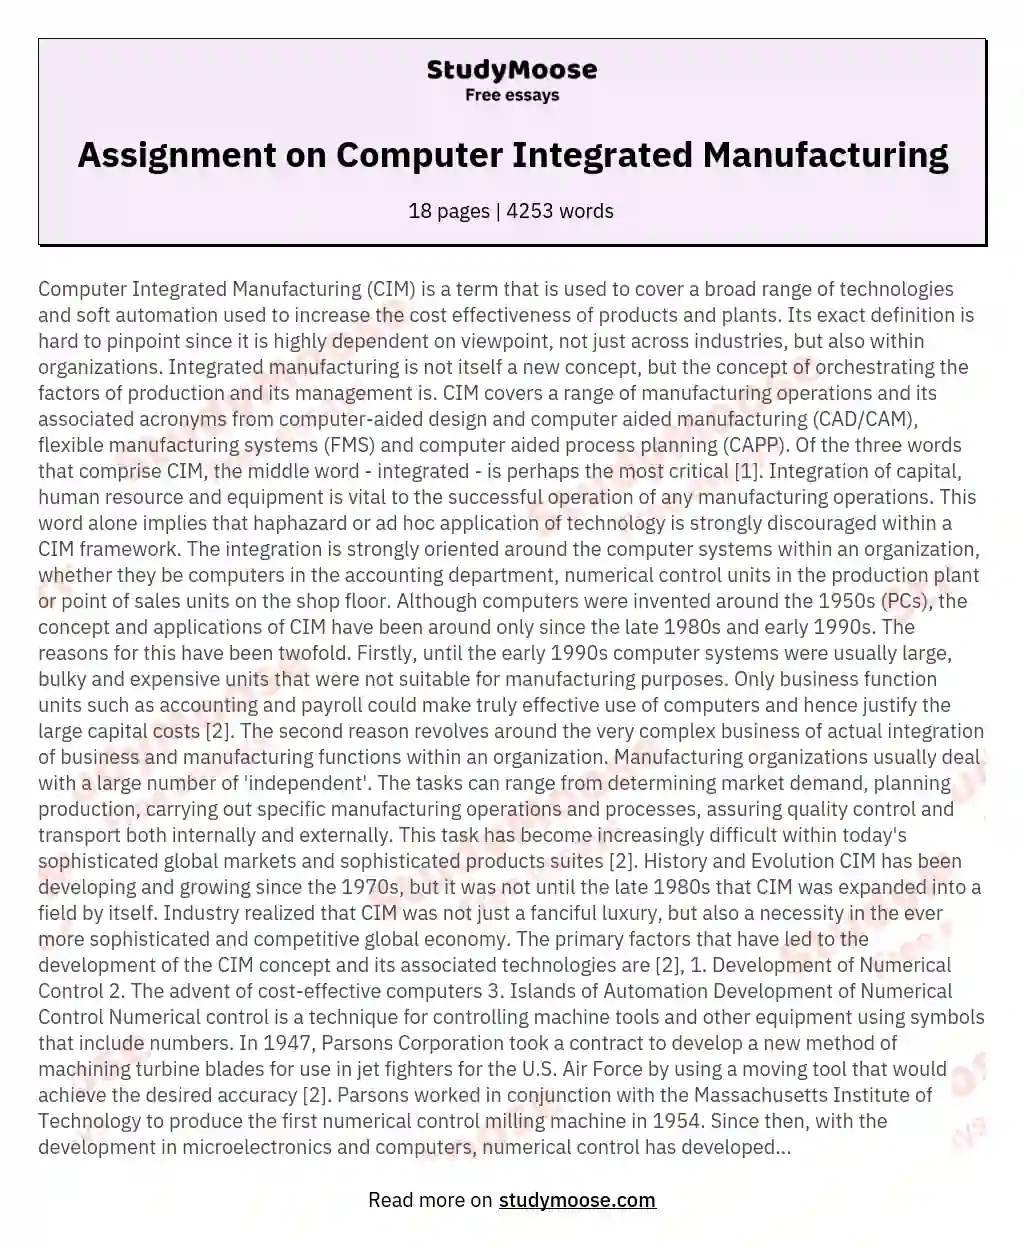 Assignment on Computer Integrated Manufacturing essay